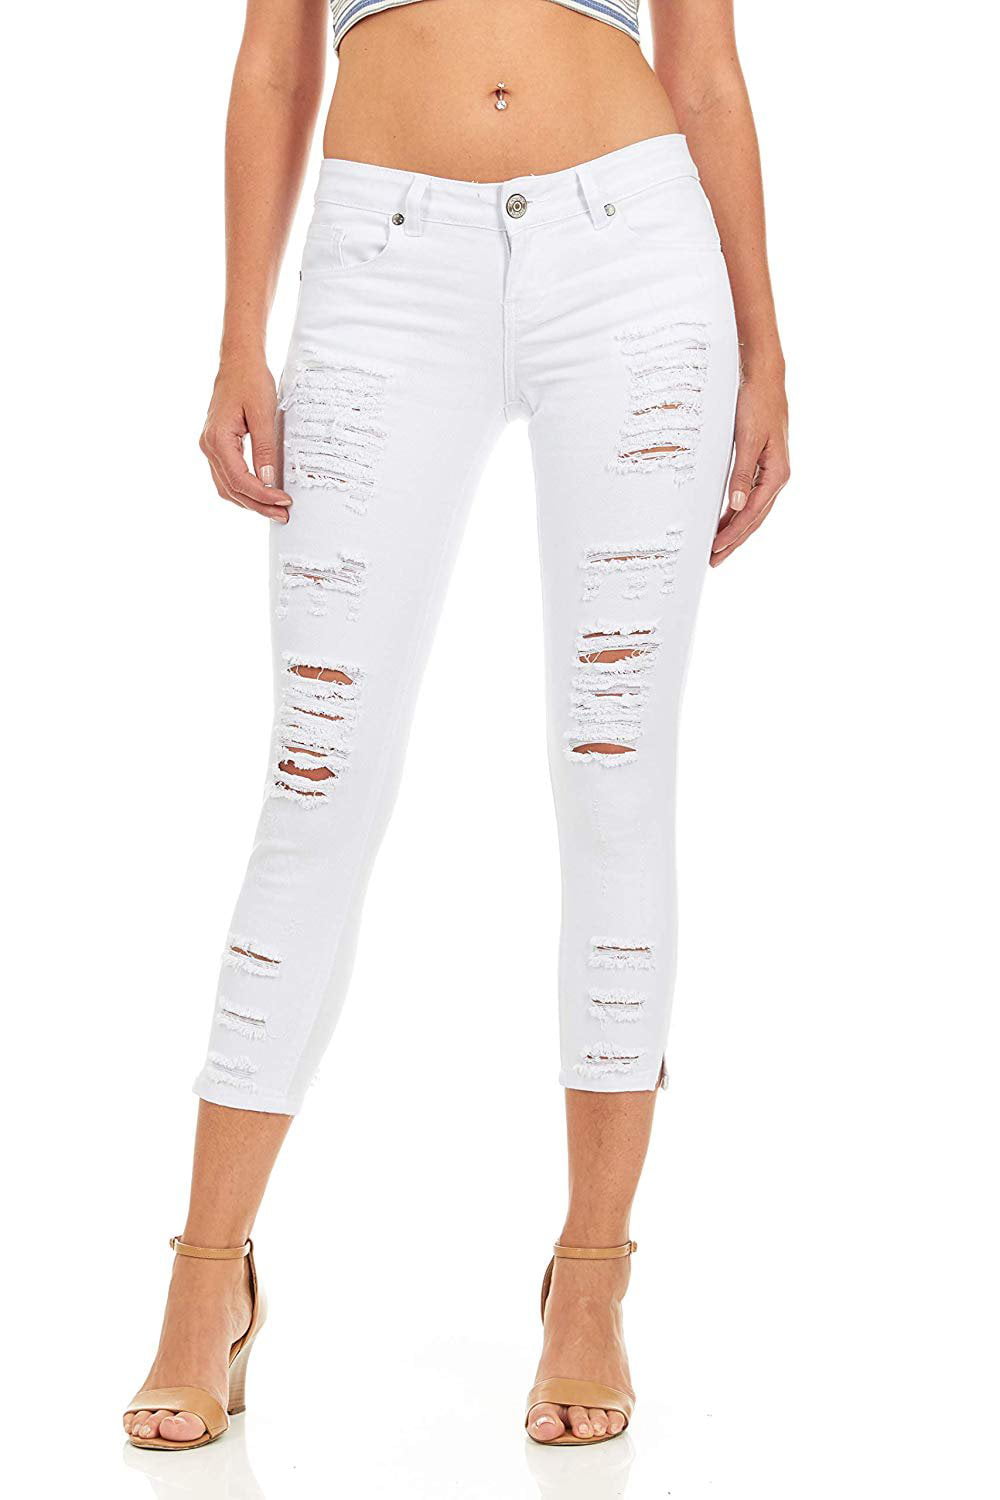 Cute Teen Girl Teen Girlss Cropped Ripped Distressed Skinny Jeans Size ...